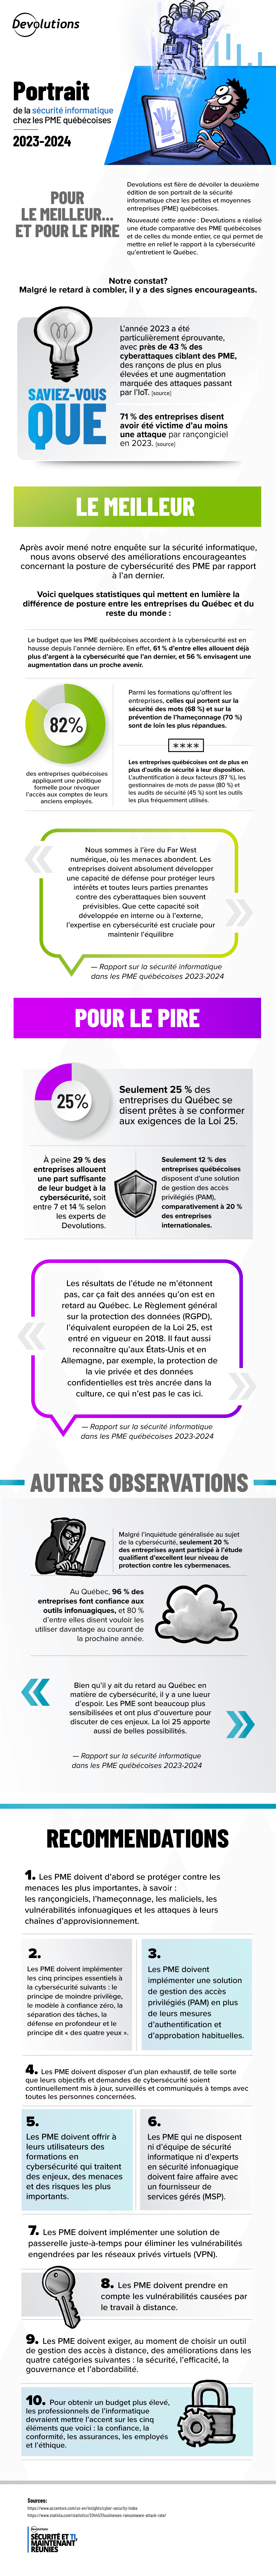 survey-infographic-2023-2024-fr (1).png